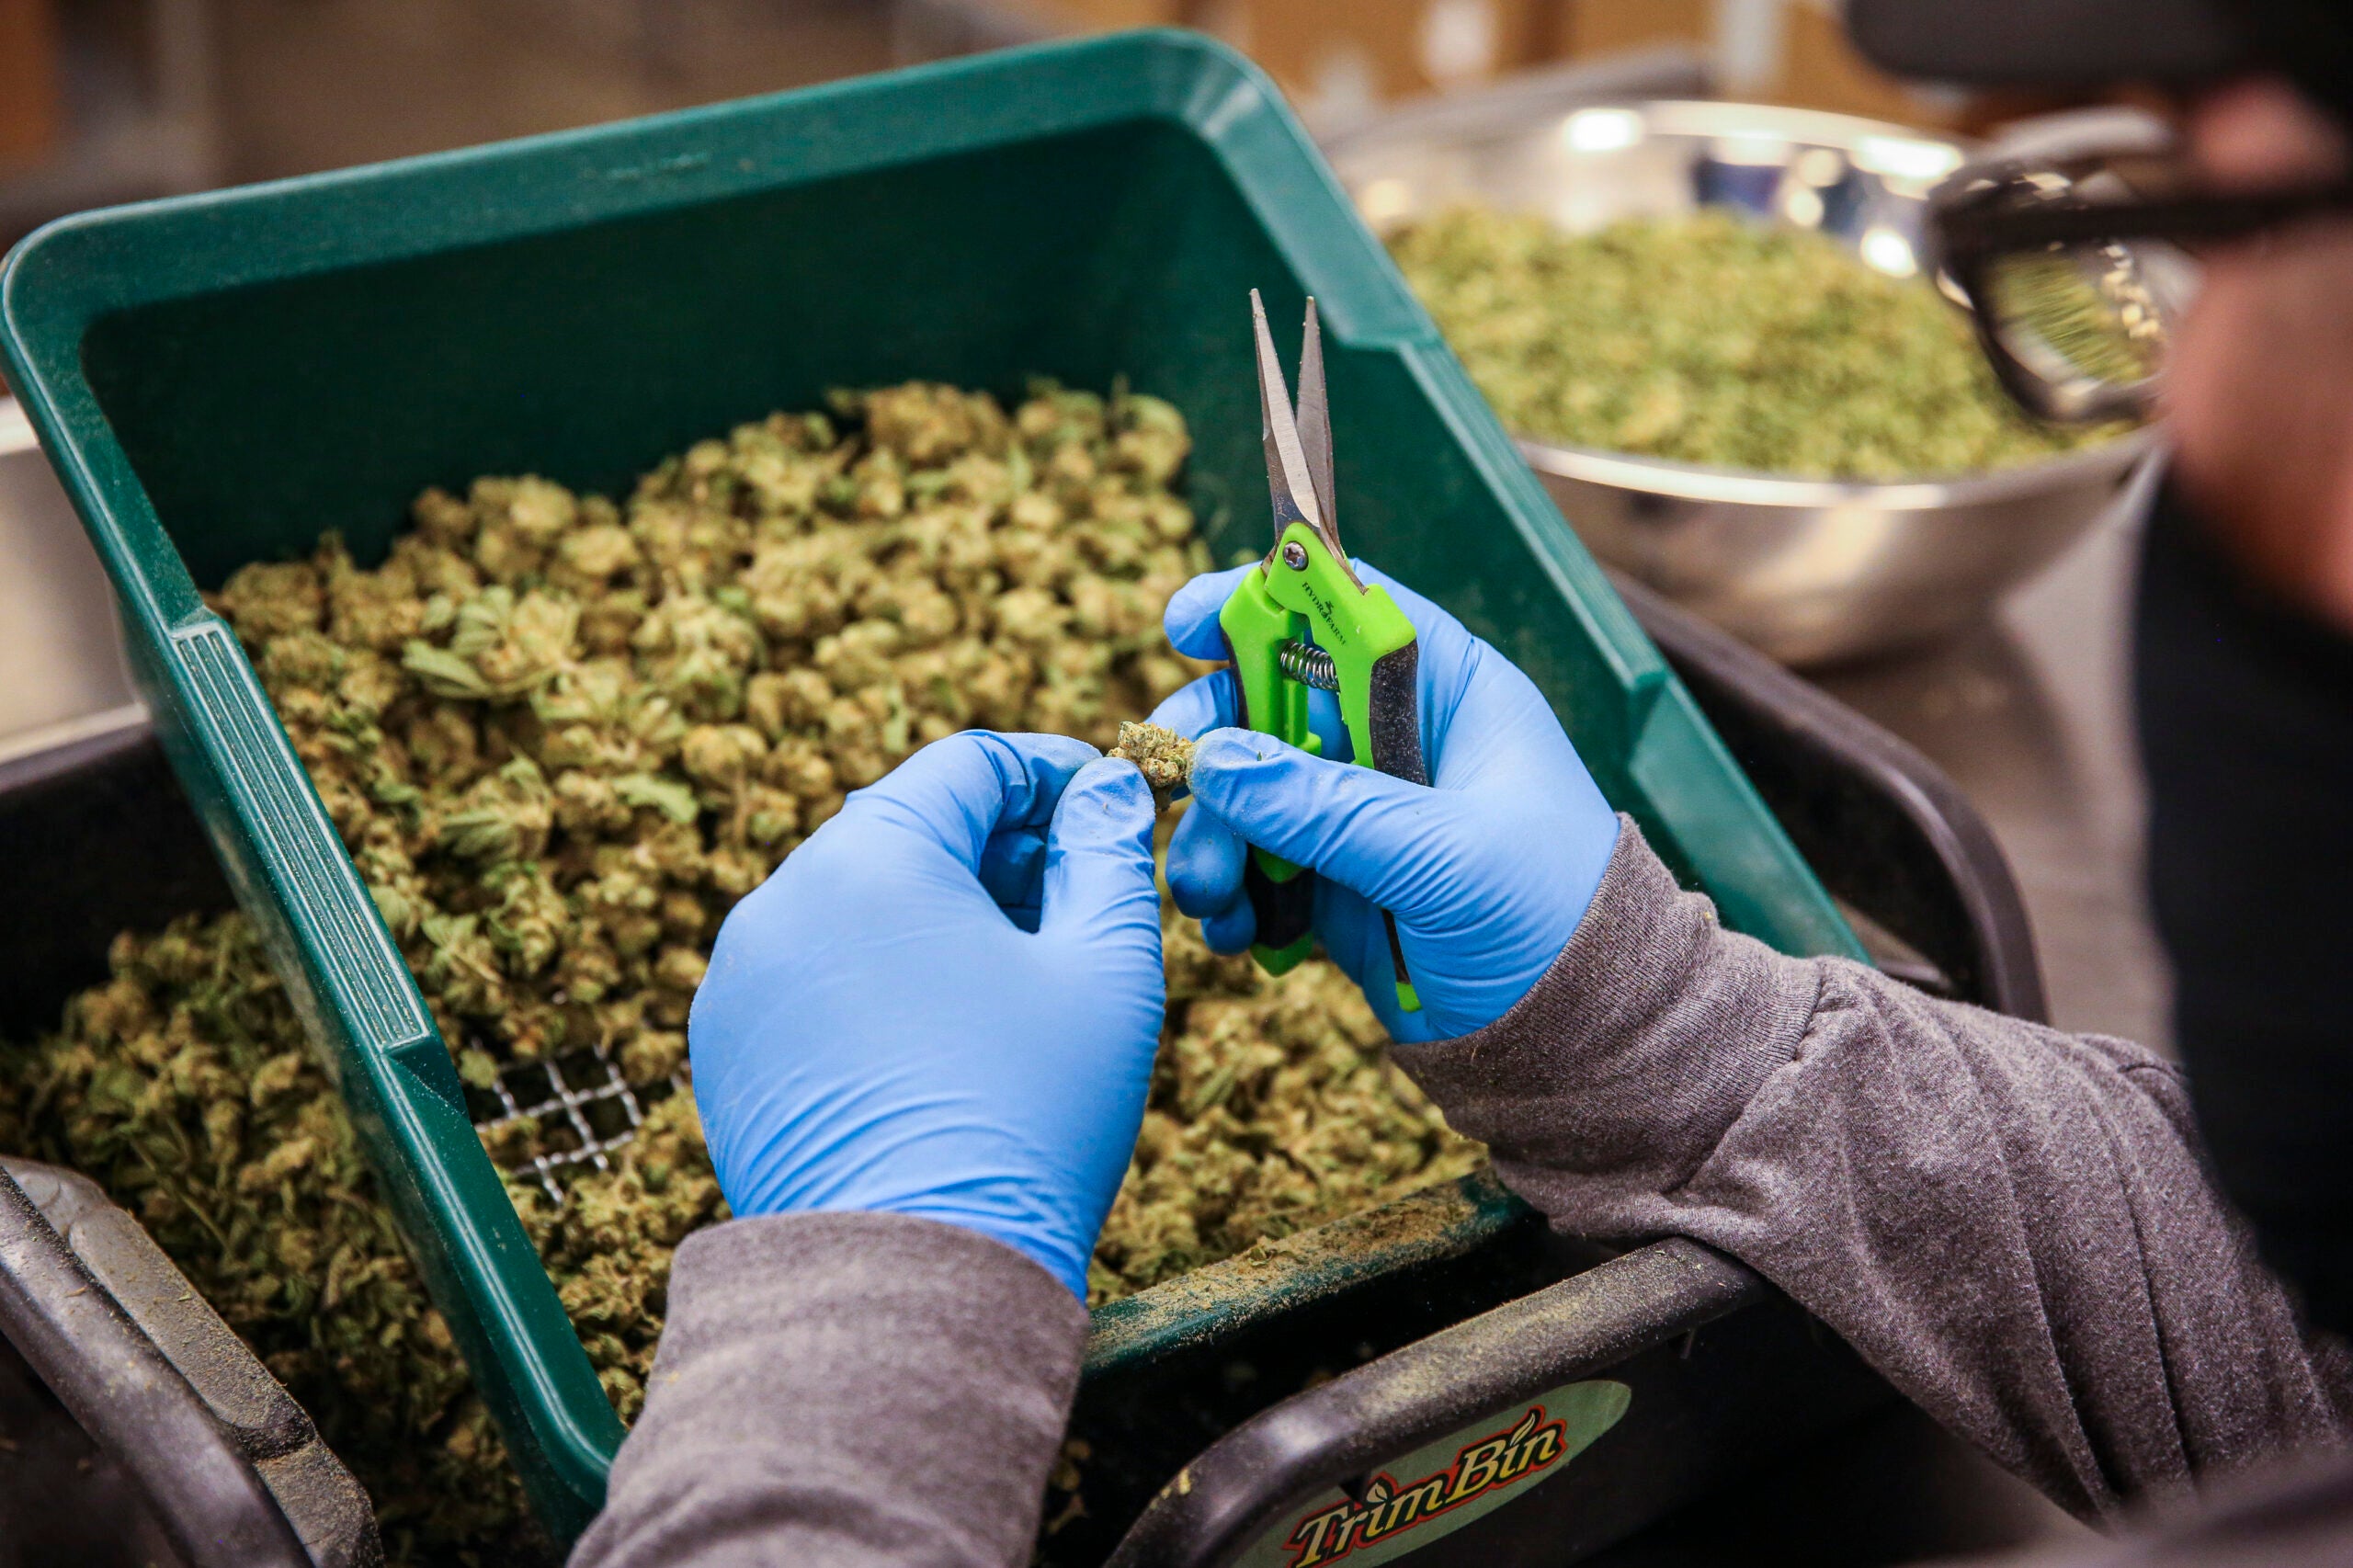 A CommCan employee trims flower while working in CommCan’s processing facility. In Massachusetts, the price of recreational cannabis products has dropped significantly in recent months.